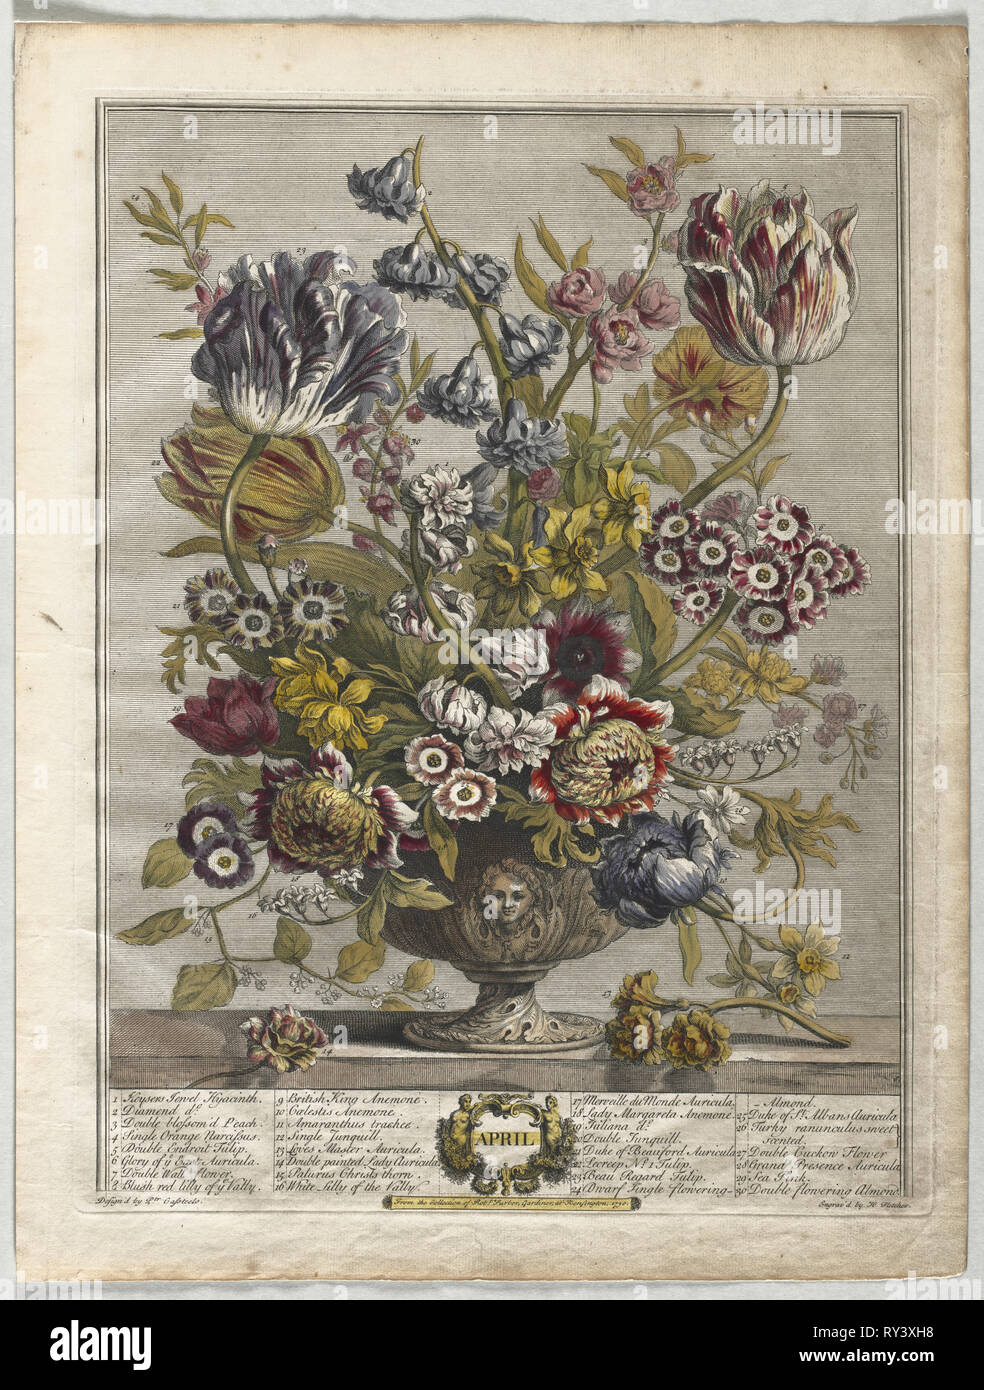 Twelve Months of Flowers:  April, 1730. Henry Fletcher (British, active 1715-38). Engraving, hand-colored; sheet: 46.8 x 35.5 cm (18 7/16 x 14 in.); platemark: 41.7 x 32 cm (16 7/16 x 12 5/8 in Stock Photo